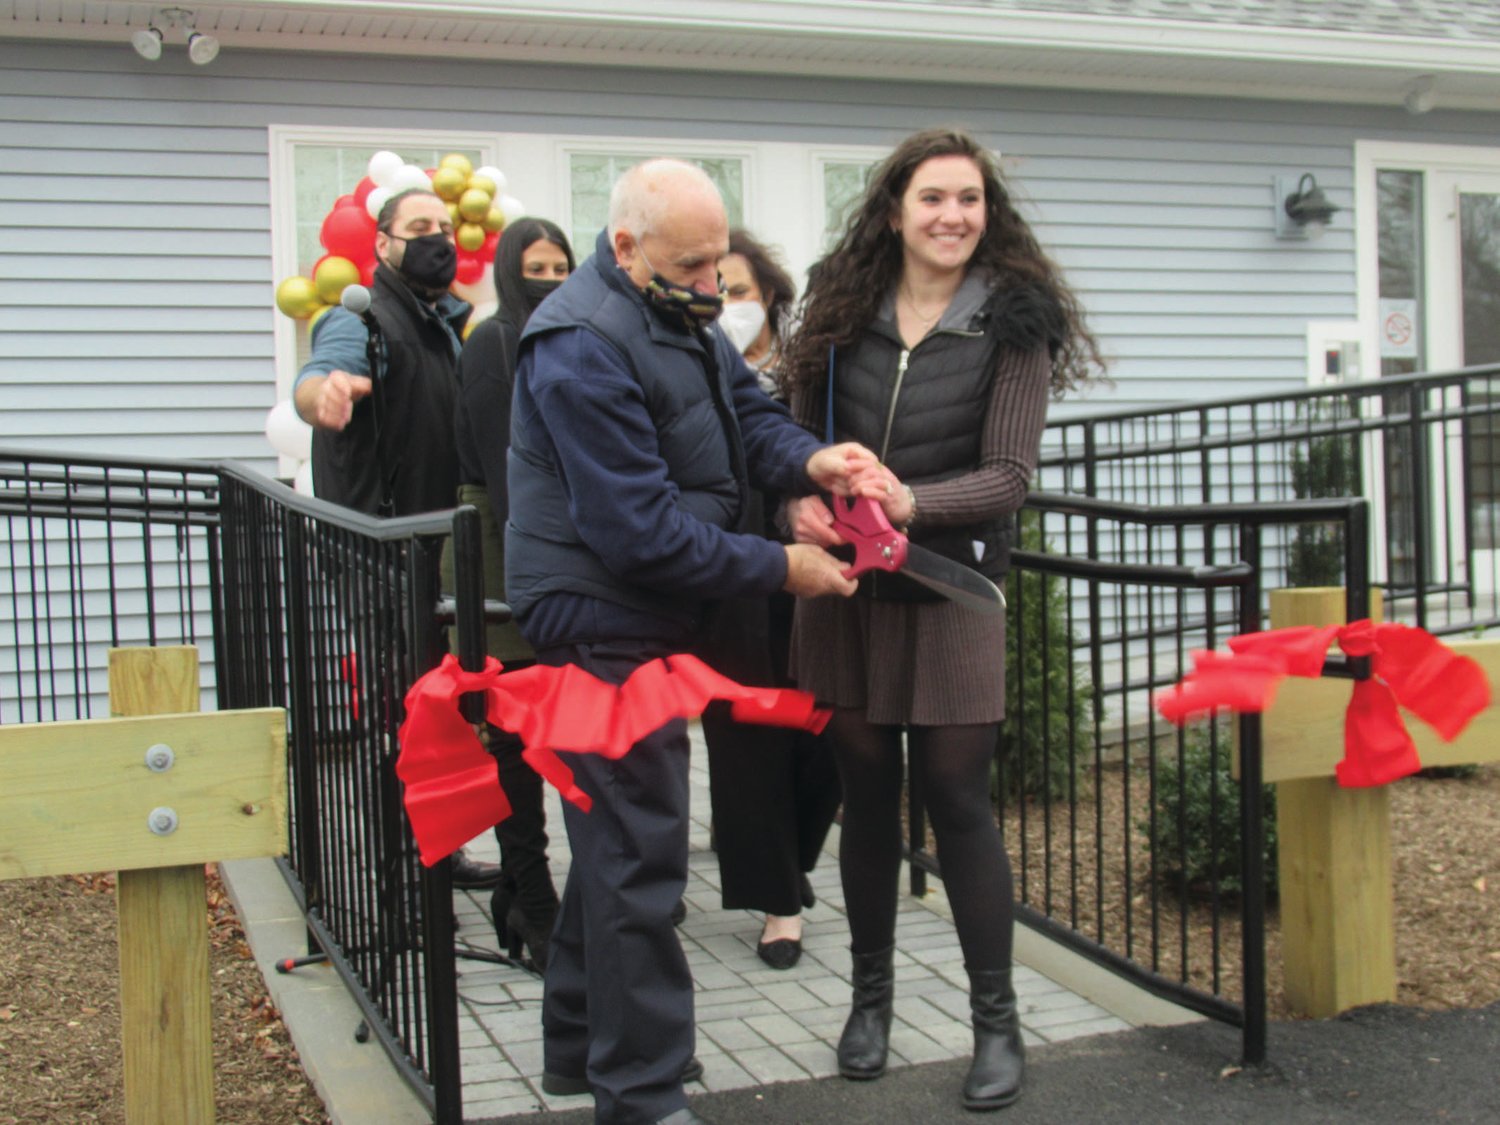 SUPER SNIP: Mayor Joseph Polisena and Dr. Jessica DiRocco make it official by cutting the ribbon during the grand opening of Johnston’s newest business.